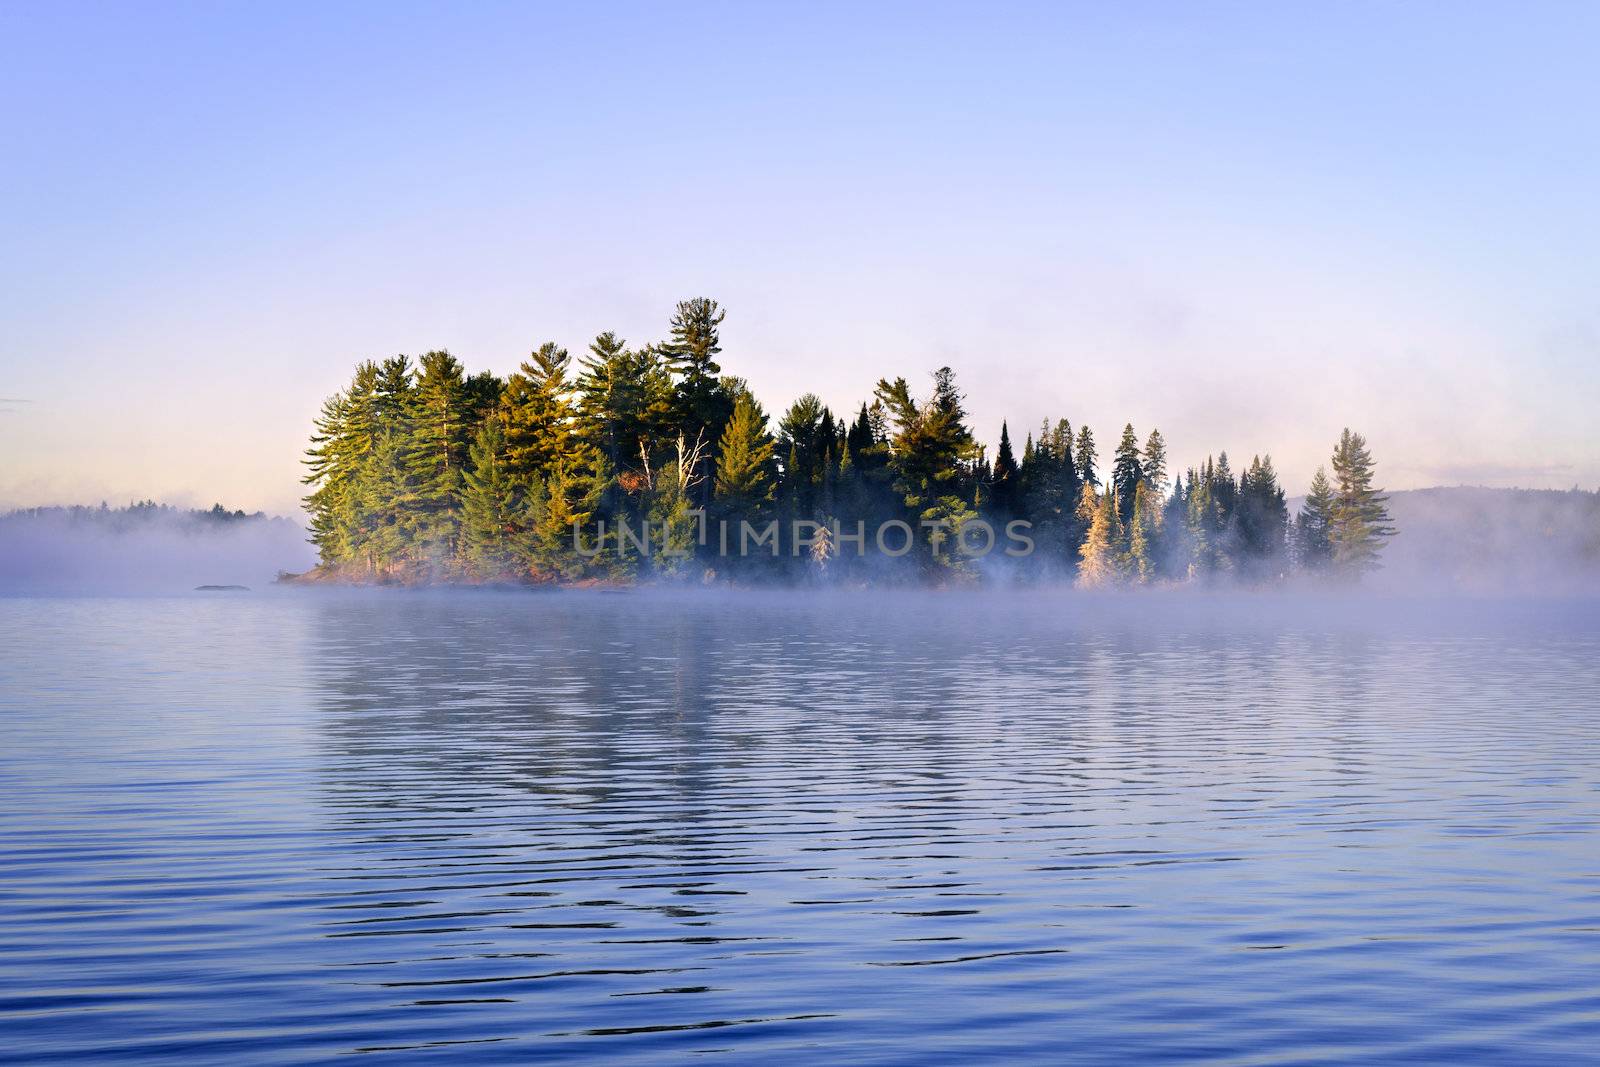 Island with pine trees in morning fog on lake at sunrise